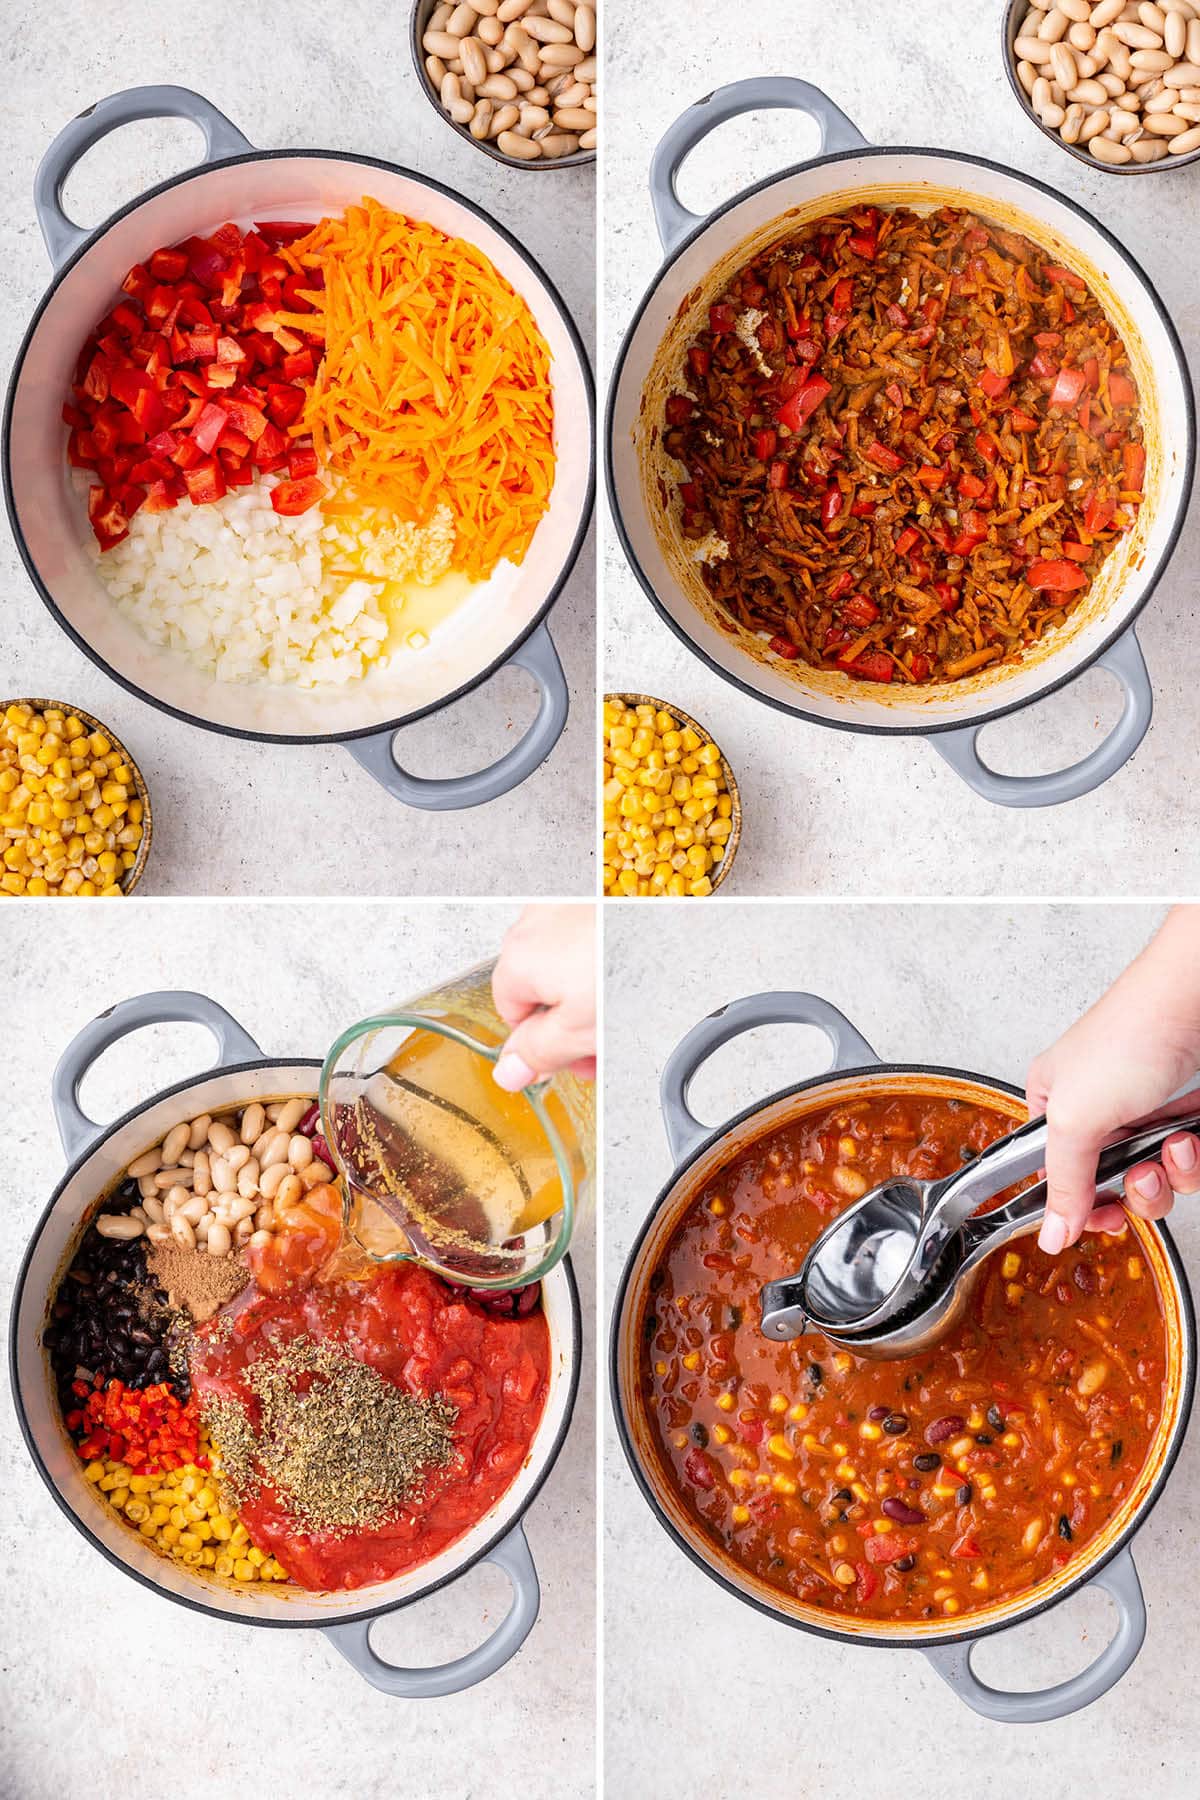 Collage of four photos showing how to make Easy Vegetarian Chili: sautéing veggies in a pan with spices, adding broth, tomatoes and beans, and then finishing the chili off with fresh lime juice.